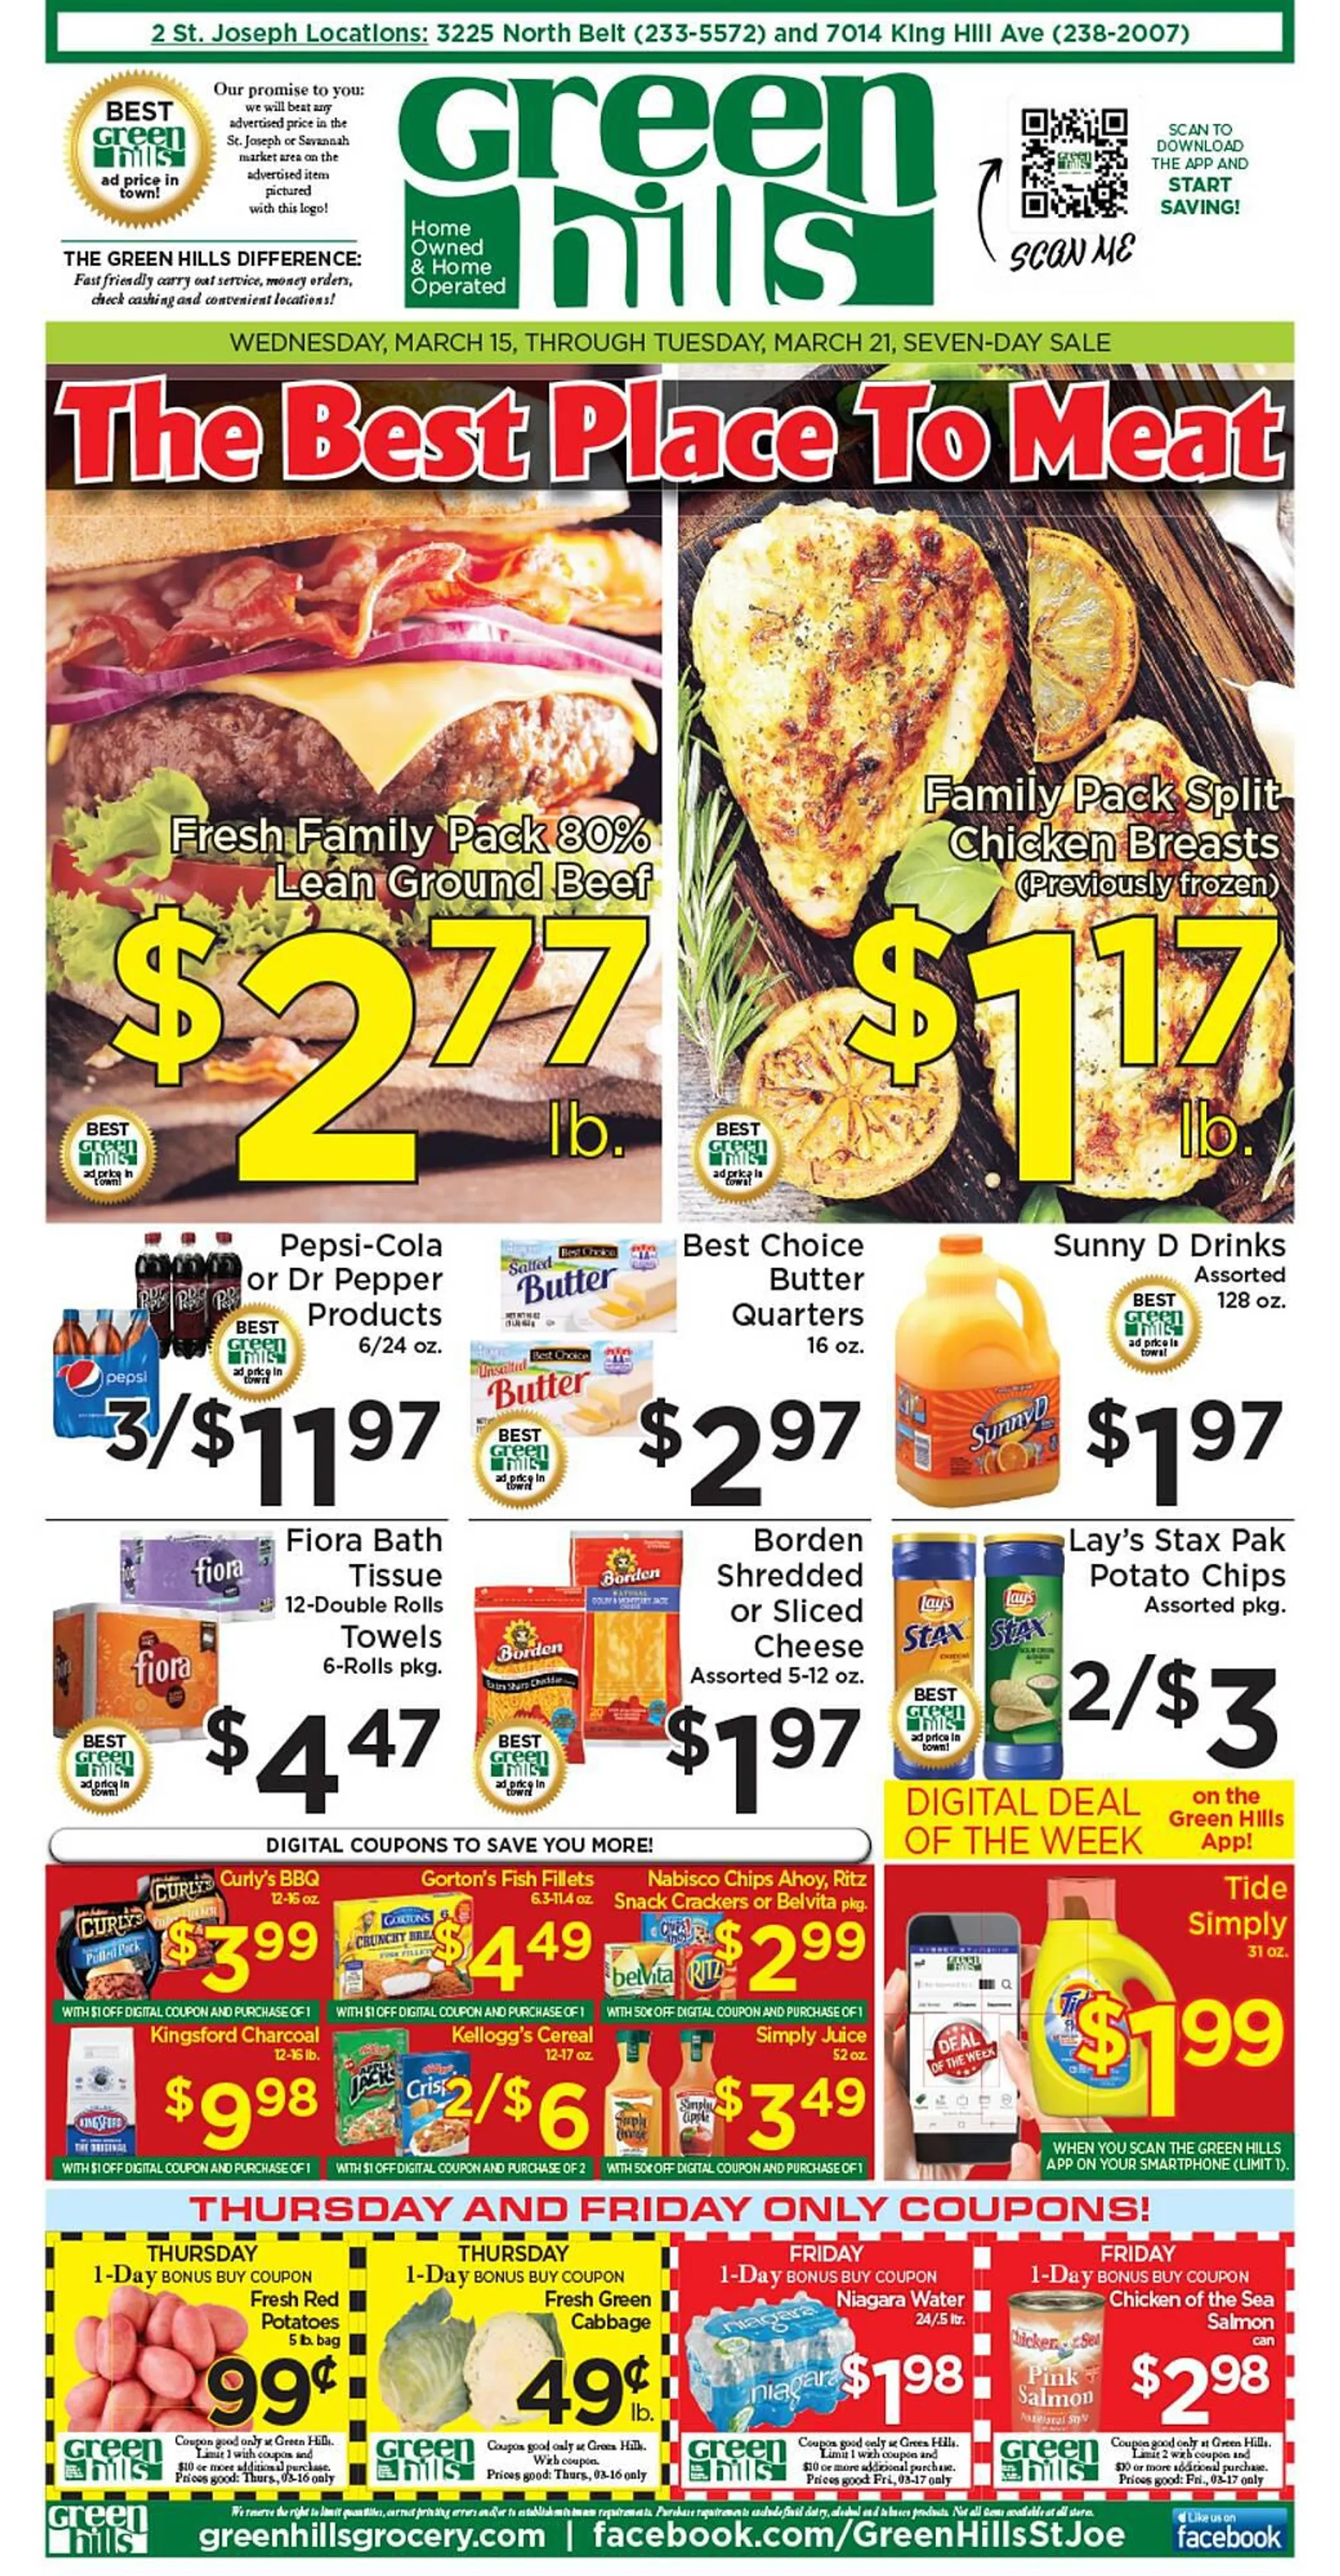 Green Hills Grocery ad - 1